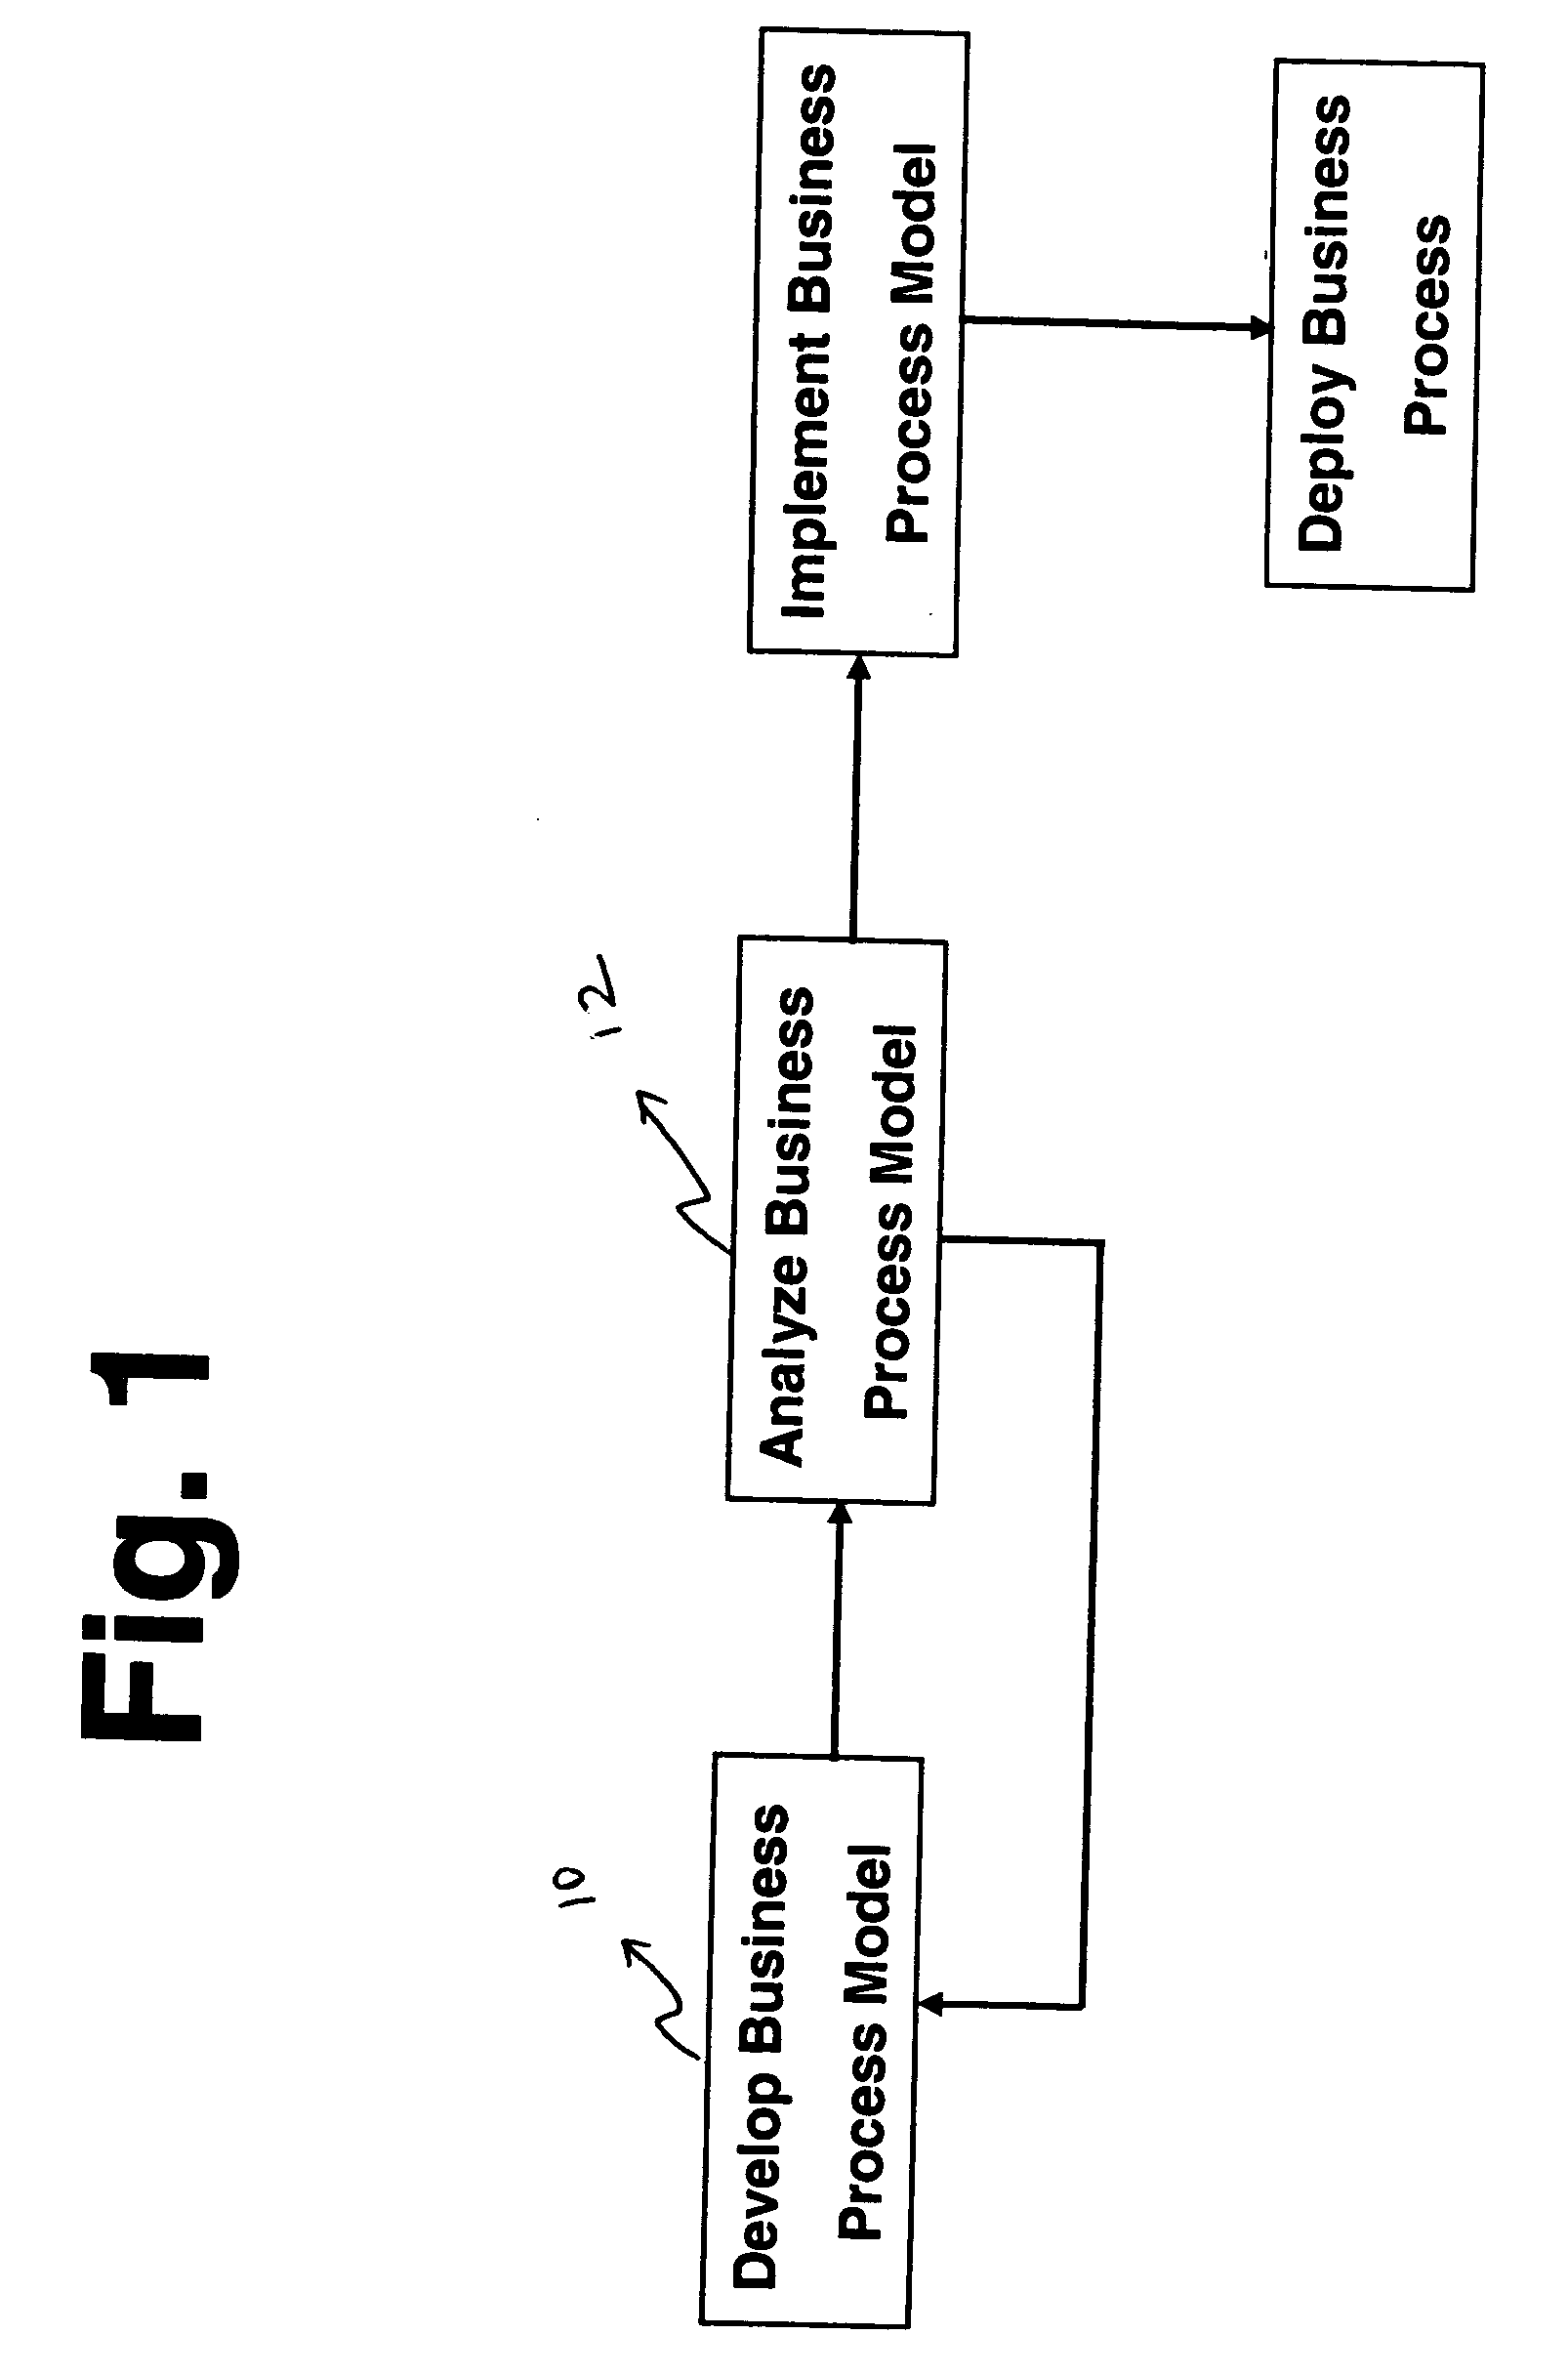 Method and apparatus for business process analysis and optimization